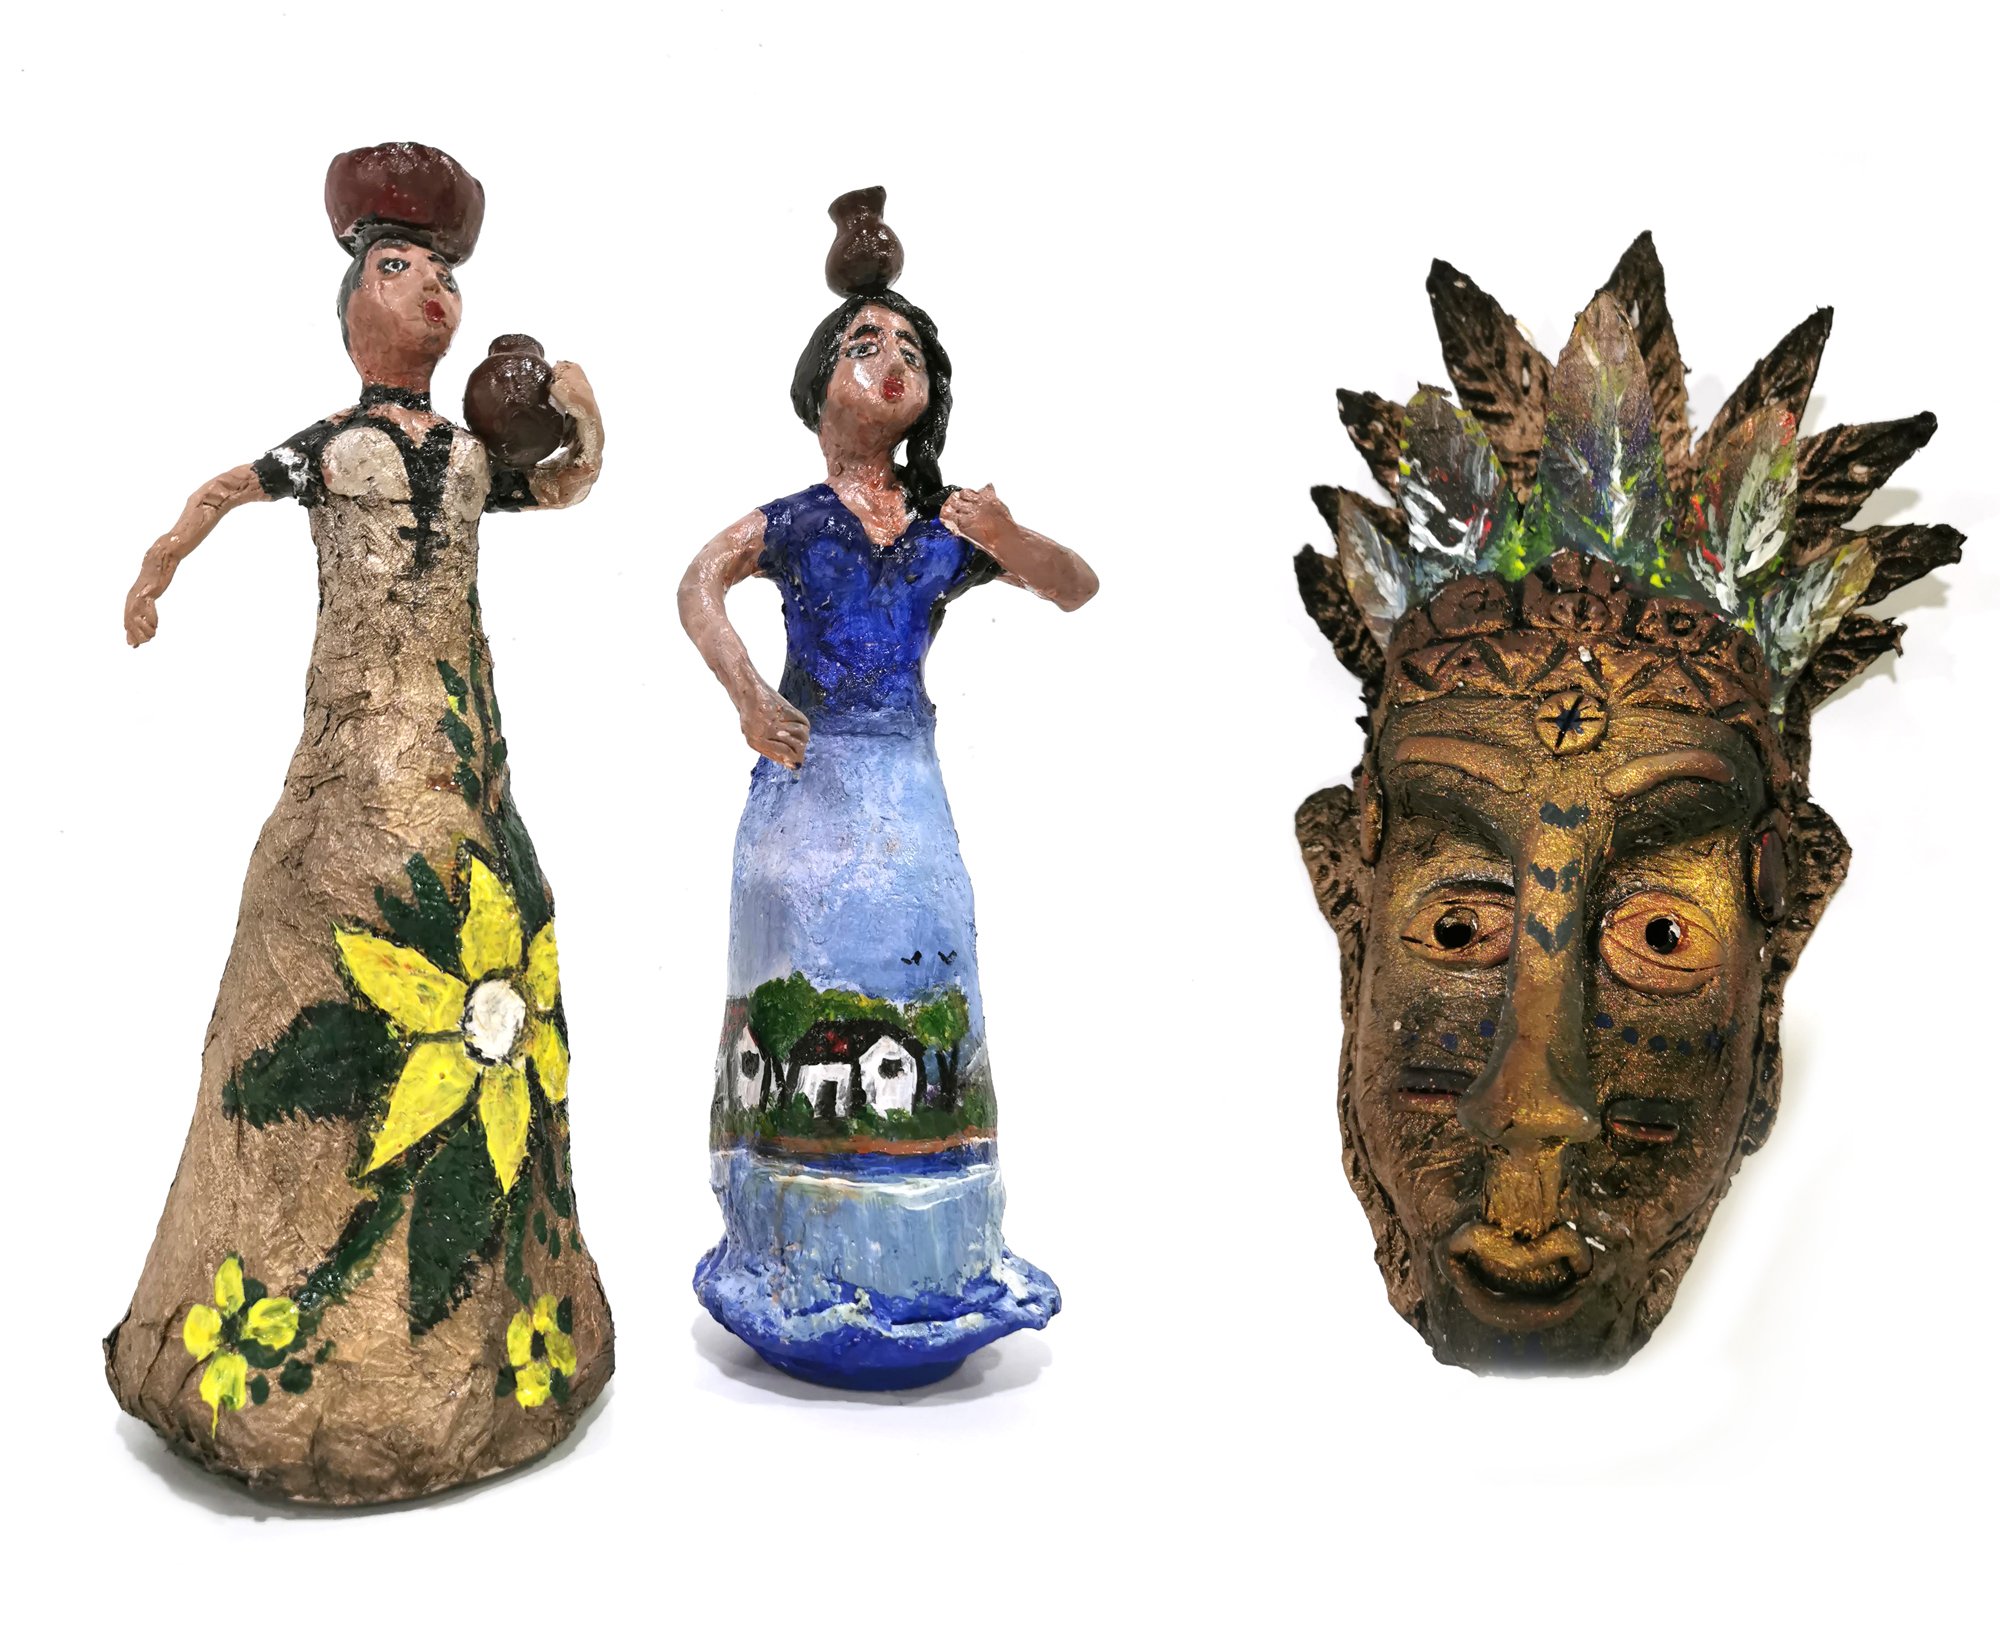 A mask and two figures made from recycled materials - the figures represent women from El Salvador, with baskets on their heads, selling fruit and the mask represents Mayan mythological art.